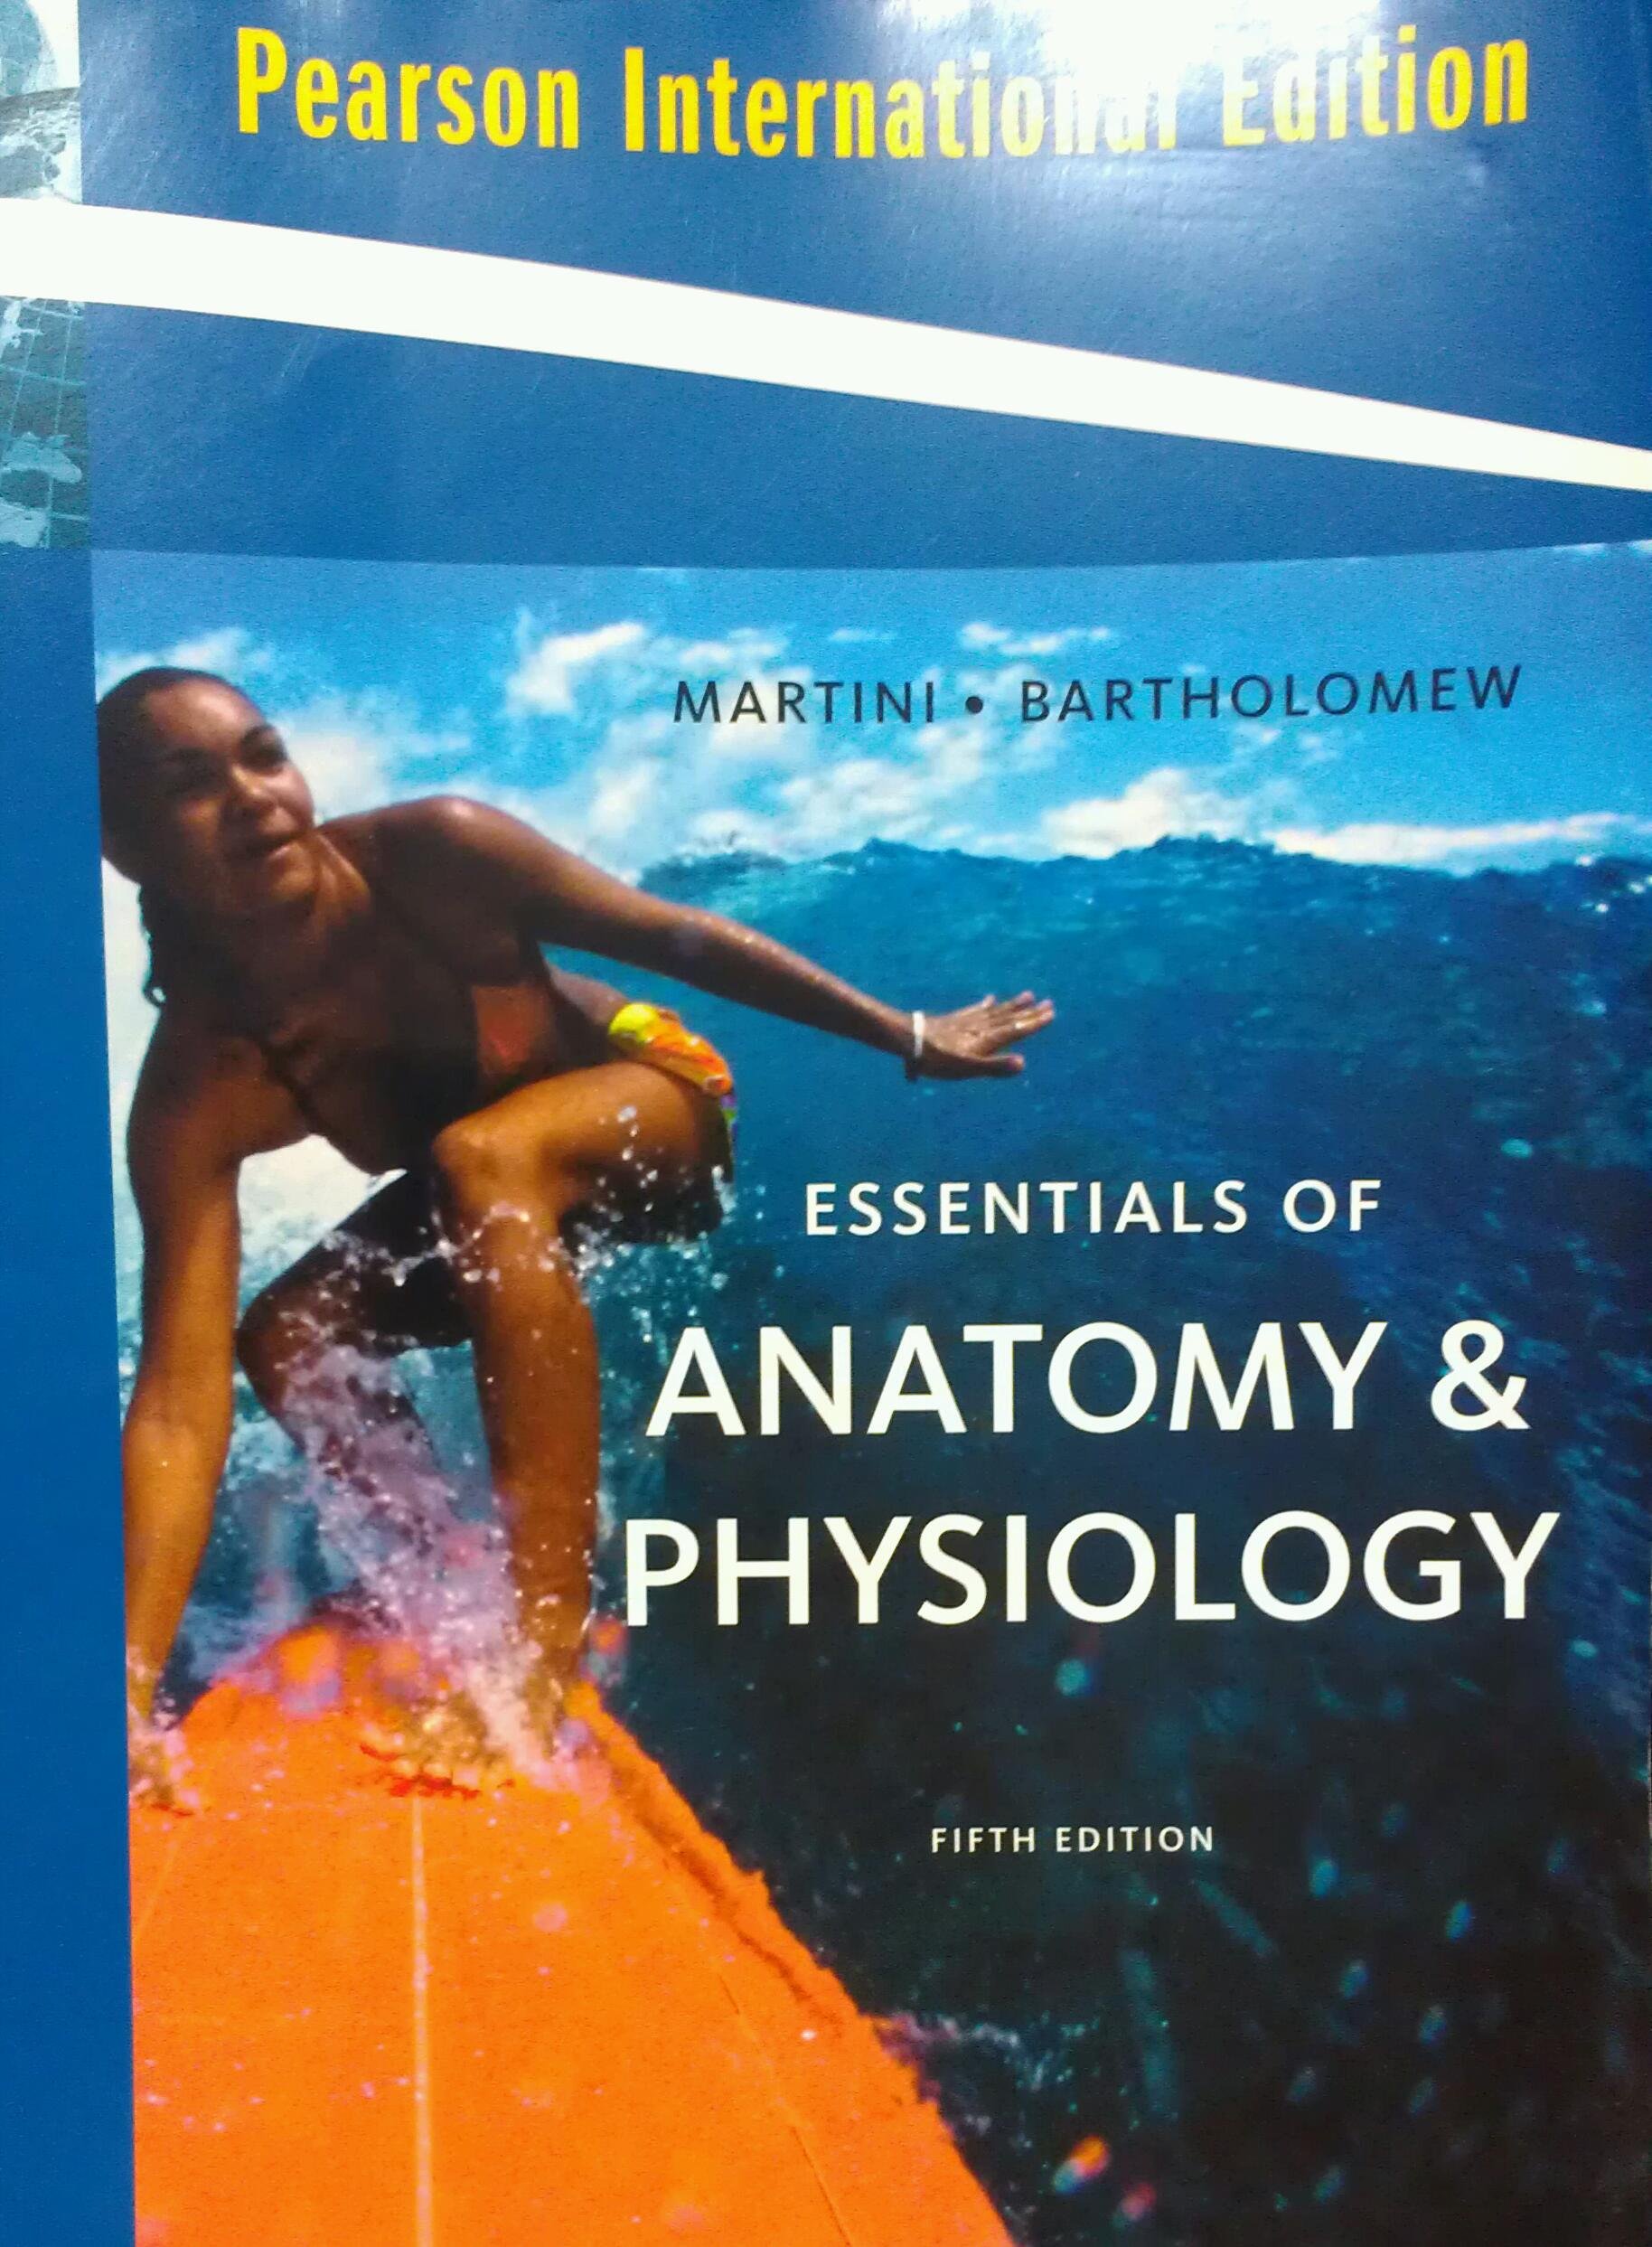 Essentials of anatomy & physiology :  fifth edition